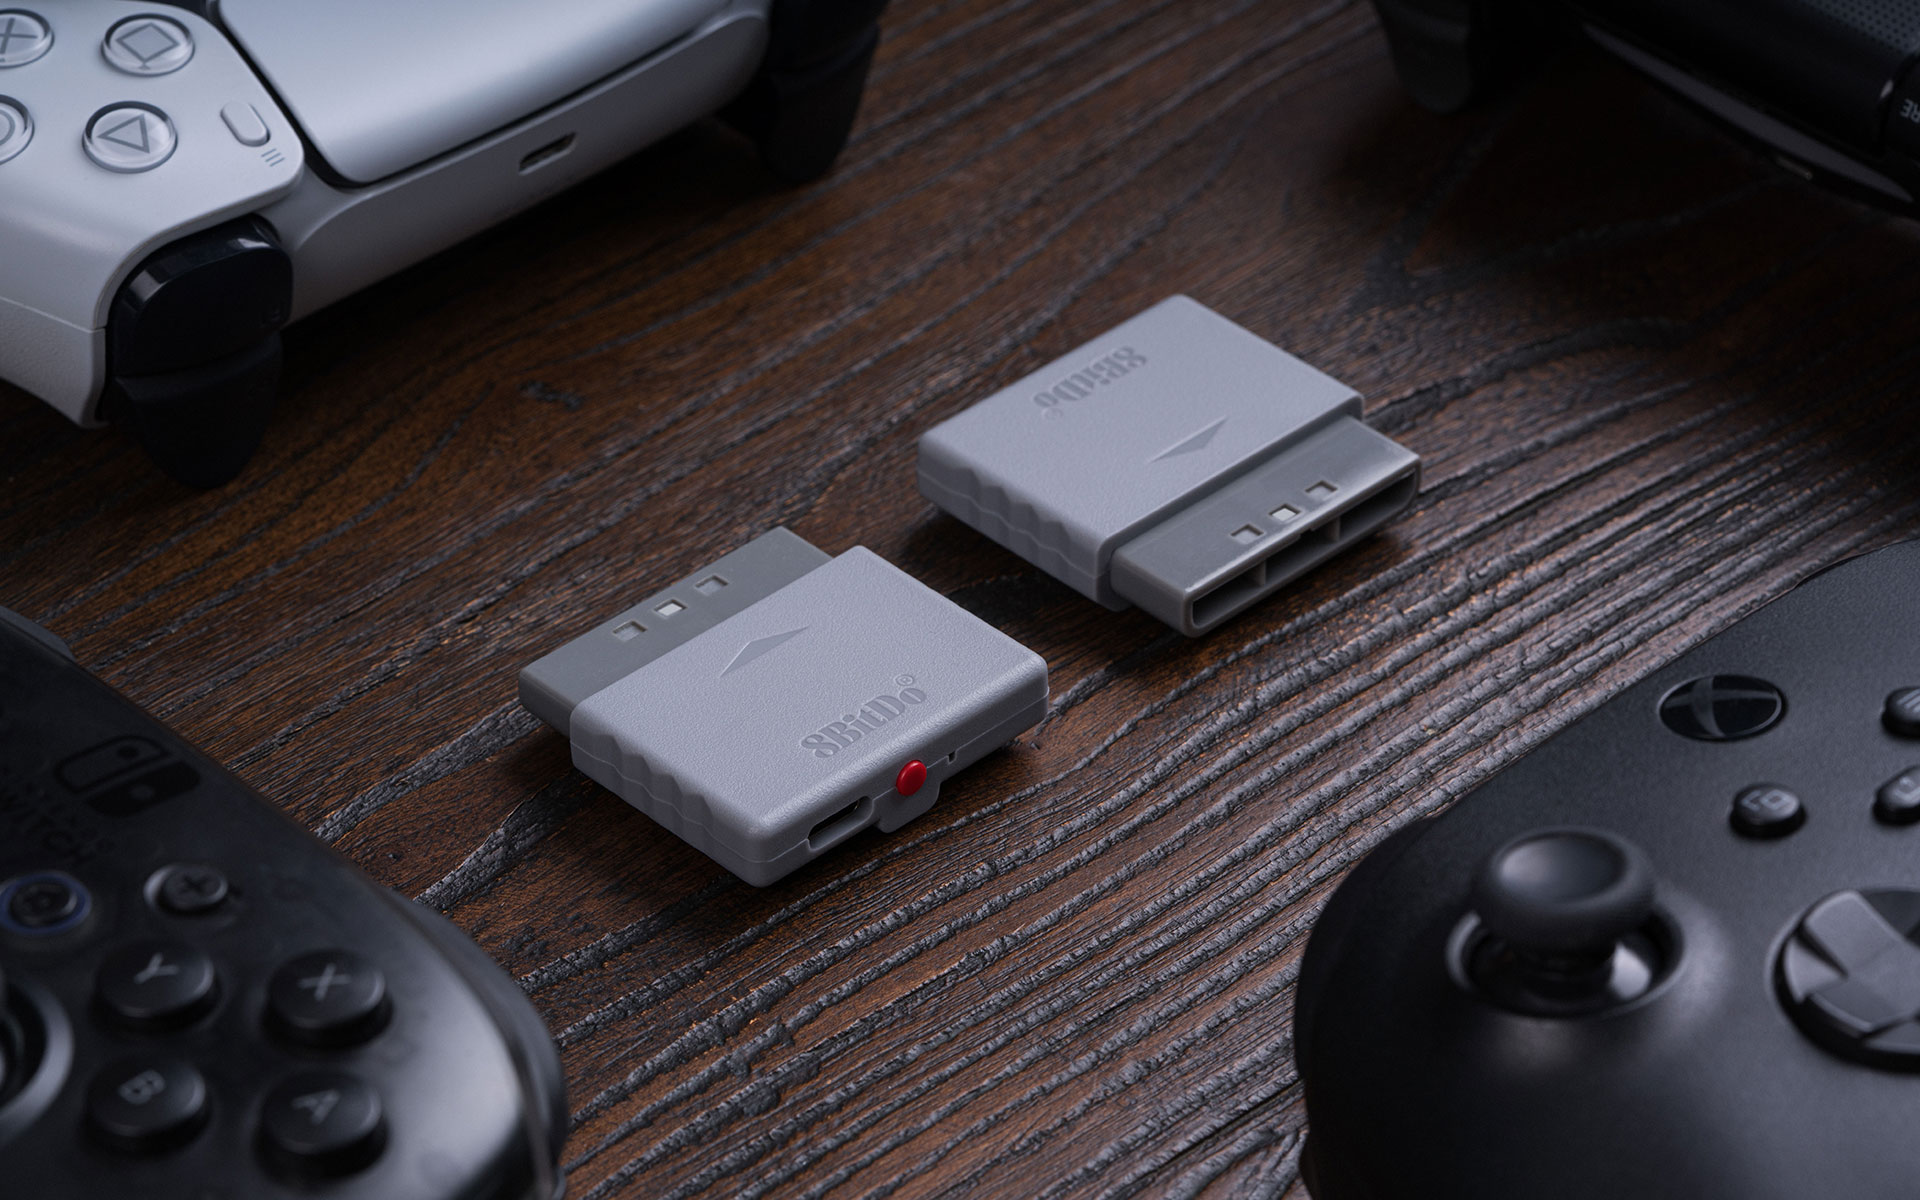 8BitDo now makes the best Switch pro controller - The Verge